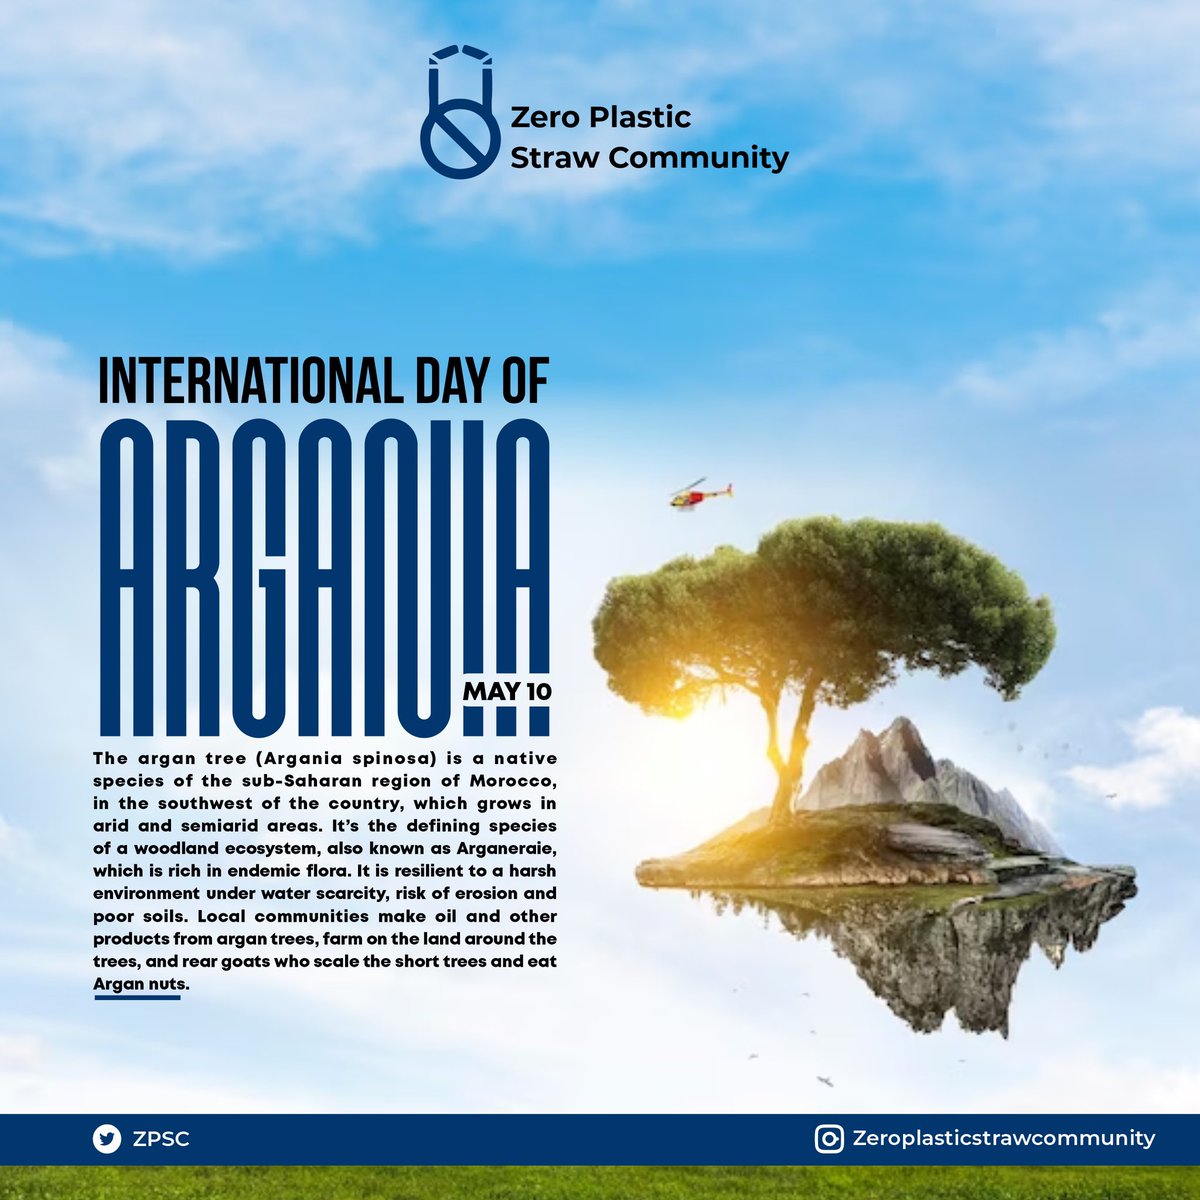 It’s international day of Argania 

The argan tree (Argania spinosa) is a native species of the sub-Saharan region of Morocco, in the southwest of the country, which grows in arid and semiarid areas.

@UNEP @UN 
@IntDayArgania @ArganiaOil 

#InternationalDayOfArgania #ArganiaDay